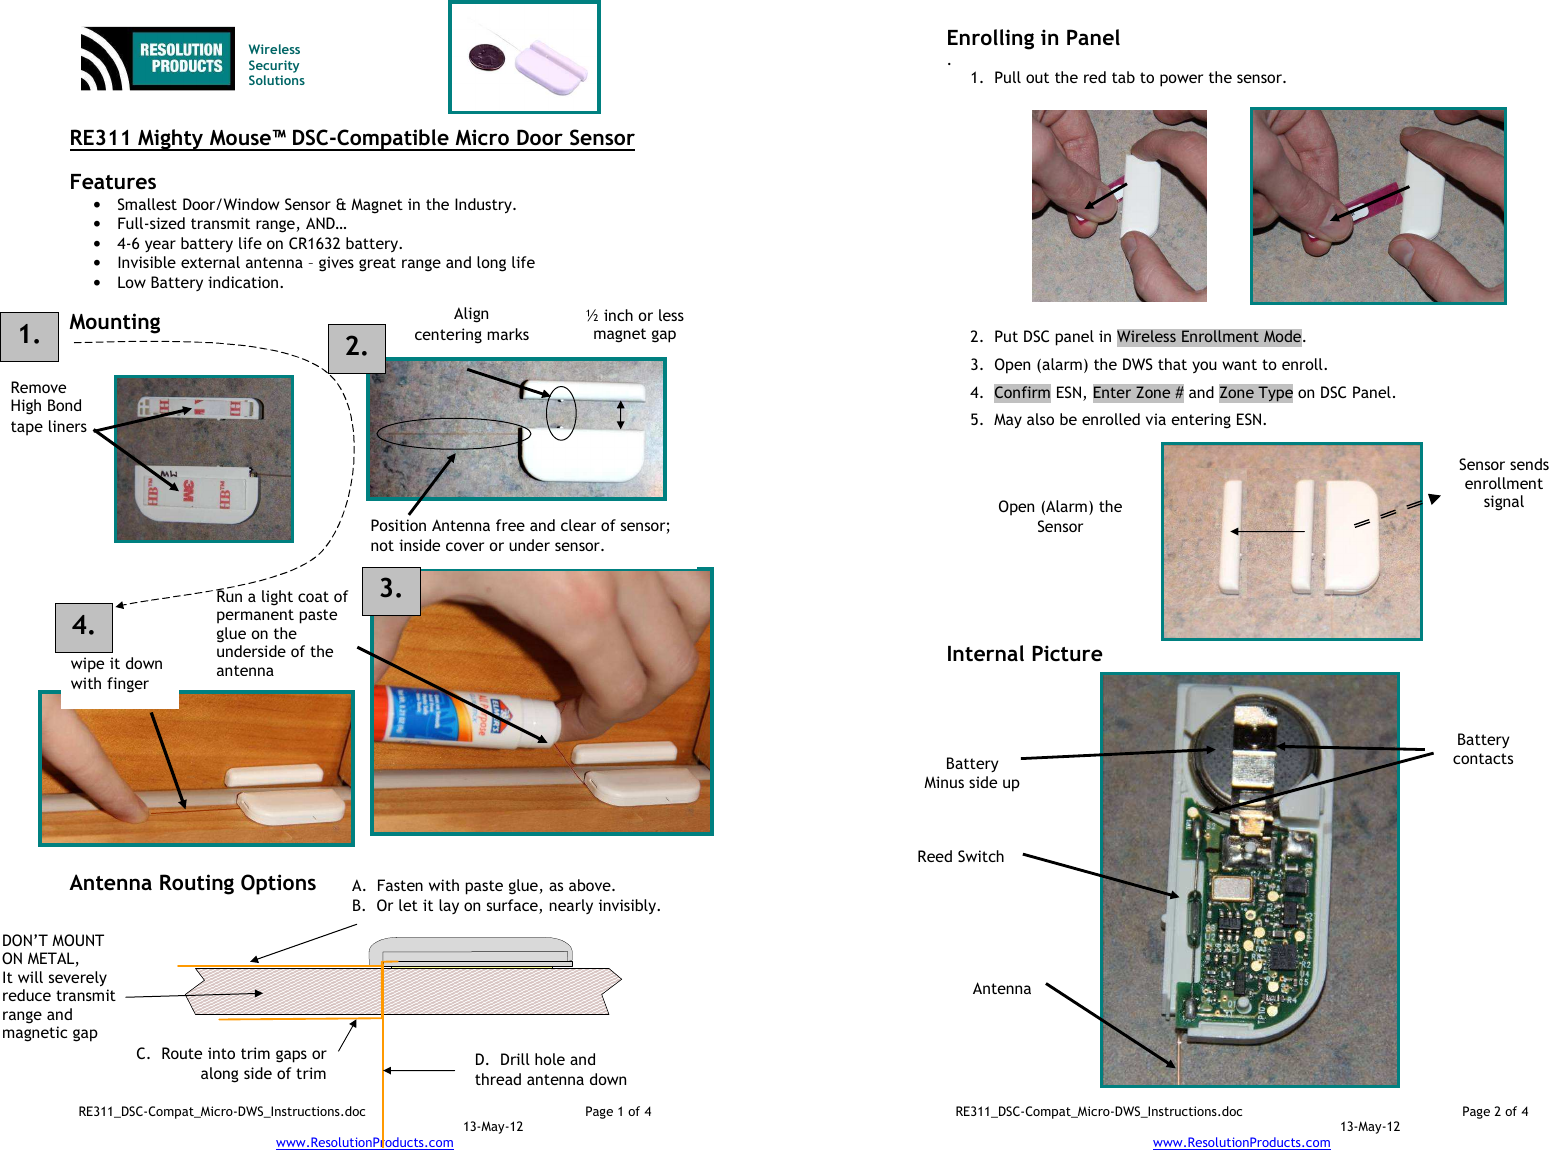 RE311_DSC-Compat_Micro-DWS_Instructions.doc  Page 1 of 4  13-May-12 www.ResolutionProducts.com     RE311 Mighty Mouse™ DSC-Compatible Micro Door Sensor  Features  • Smallest Door/Window Sensor &amp; Magnet in the Industry. • Full-sized transmit range, AND… • 4-6 year battery life on CR1632 battery. • Invisible external antenna – gives great range and long life • Low Battery indication.  Mounting                              Antenna Routing Options   Wireless  Security  Solutions Run a light coat of permanent paste glue on the underside of the antenna wipe it down with finger Remove High Bond tape liners Align centering marks Position Antenna free and clear of sensor; not inside cover or under sensor. DON’T MOUNT ON METAL, It will severely reduce transmit range and magnetic gap A.  Fasten with paste glue, as above.   B.  Or let it lay on surface, nearly invisibly. D.  Drill hole and thread antenna down C.  Route into trim gaps or along side of trim 1. 2. ½ inch or less magnet gap 3. 4. RE311_DSC-Compat_Micro-DWS_Instructions.doc  Page 2 of 4  13-May-12 www.ResolutionProducts.com  Enrolling in Panel . 1. Pull out the red tab to power the sensor.              2. Put DSC panel in Wireless Enrollment Mode. 3. Open (alarm) the DWS that you want to enroll. 4. Confirm ESN, Enter Zone # and Zone Type on DSC Panel. 5. May also be enrolled via entering ESN.            Internal Picture Open (Alarm) the Sensor Sensor sends enrollment signal  Battery Minus side up  Reed Switch  Antenna  Battery contacts  